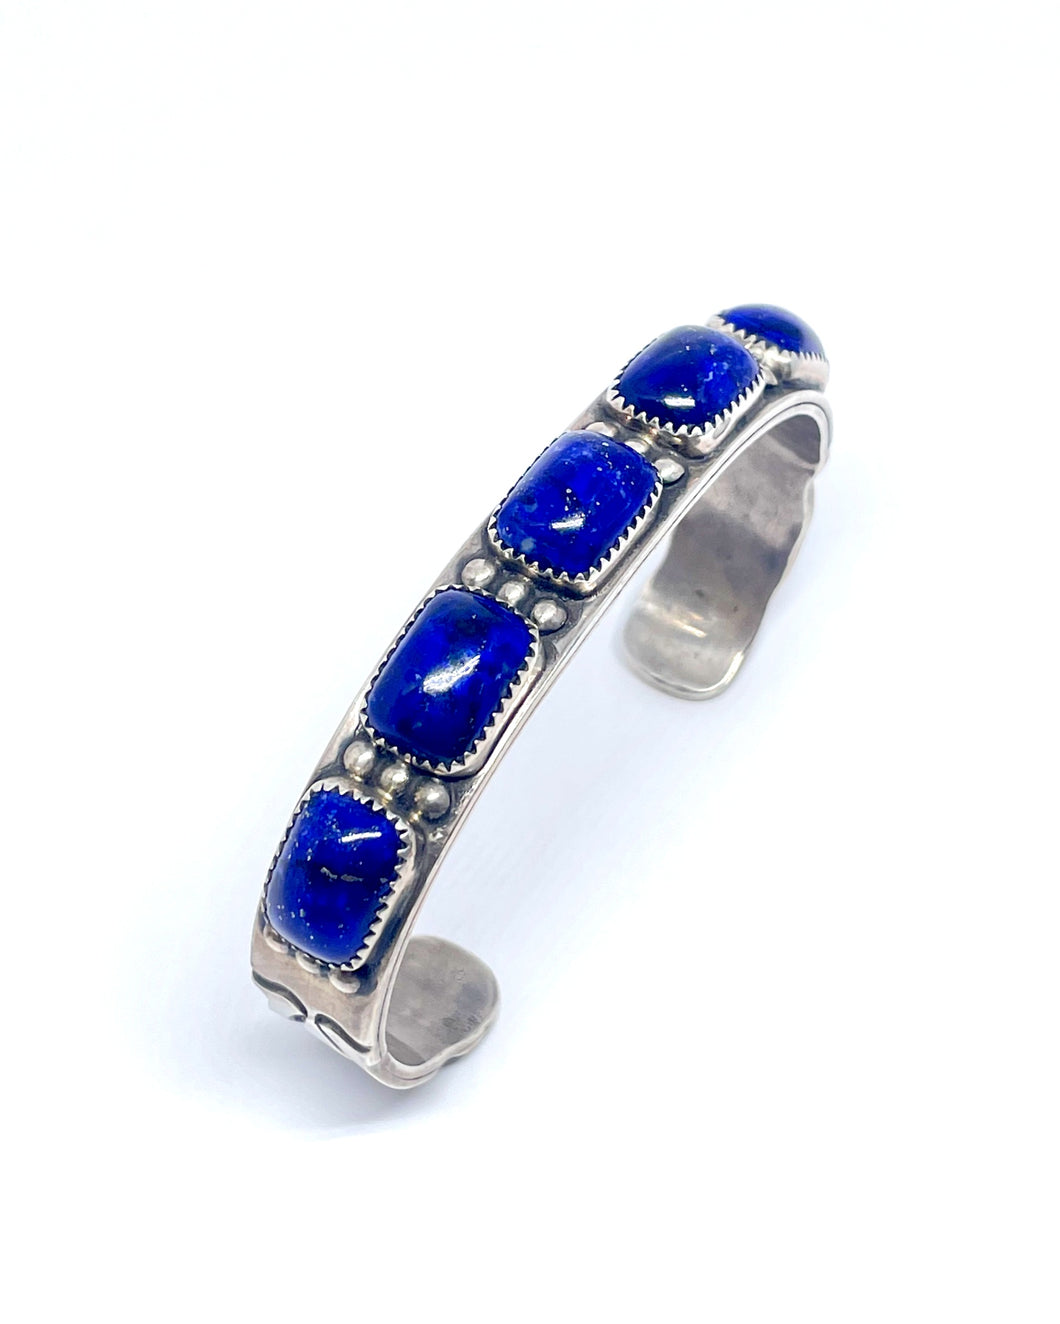 Fixed bangle with Lapis Lazuli oxidized sterling silver (925)